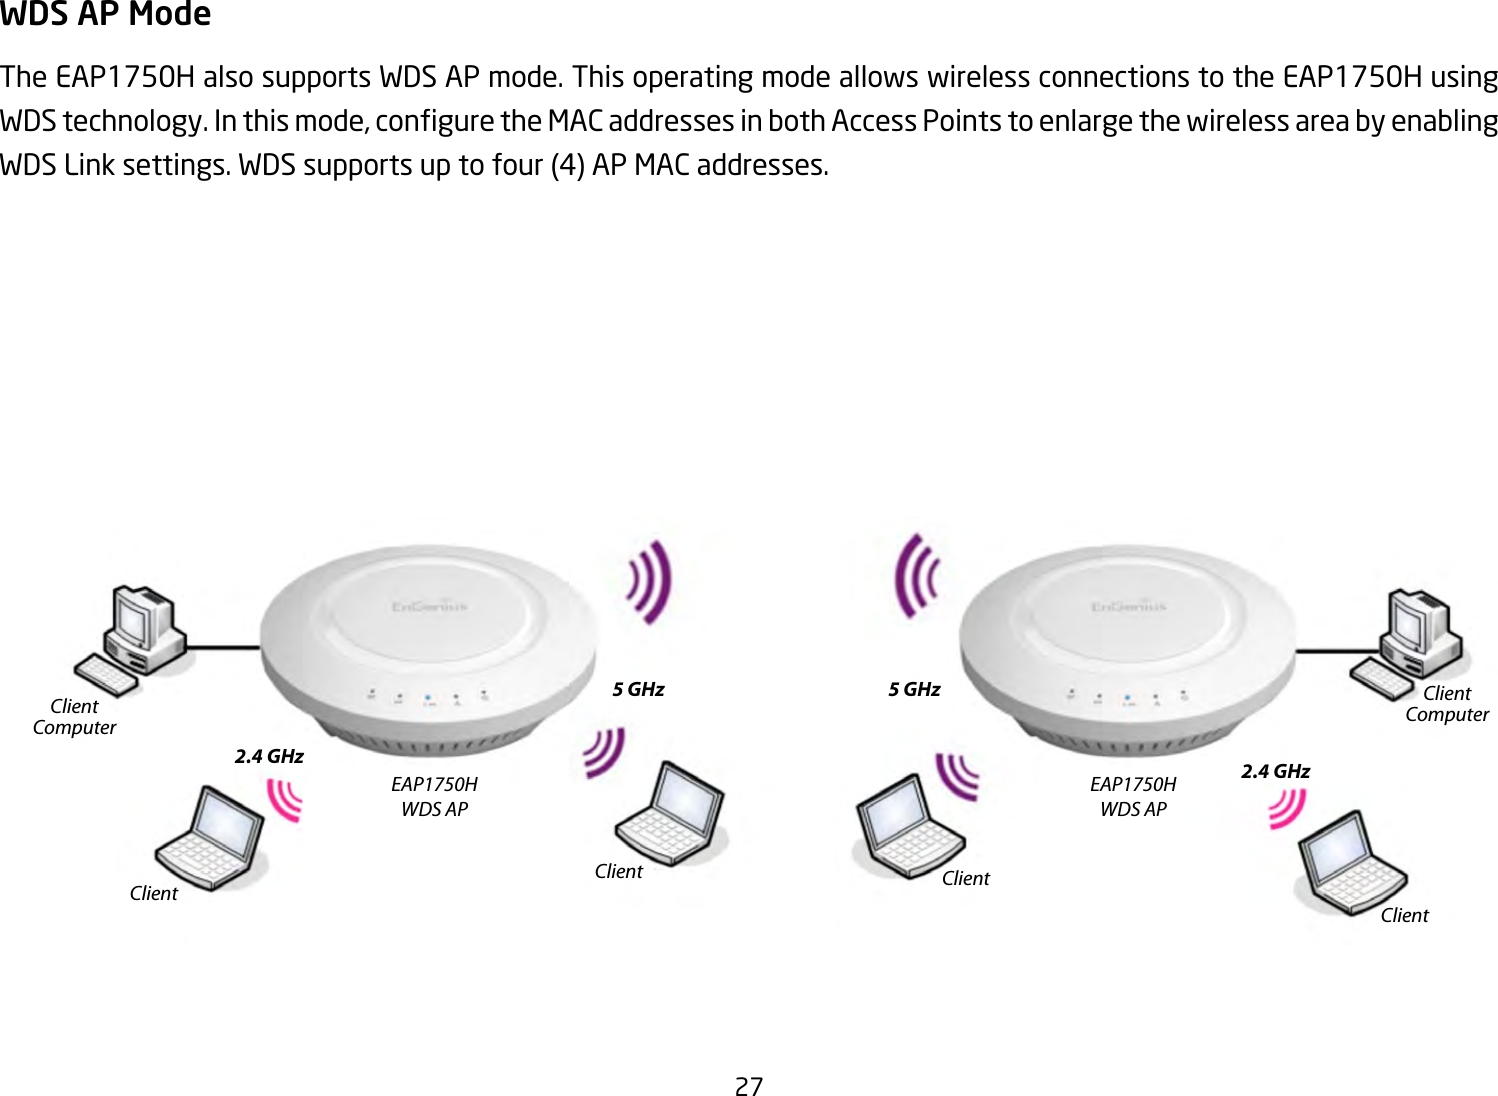 27WDS AP ModeThe EAP1750H also supports WDS AP mode. This operating mode allows wireless connections to the EAP1750H using WDStechnology.Inthismode,conguretheMACaddressesinbothAccessPointstoenlargethewirelessareabyenablingWDSLinksettings.WDSsupportsuptofour(4)APMACaddresses.EAP1750HWDS APEAP1750HWDS AP2.4 GHz 2.4 GHz5 GHz 5 GHzClientClient ClientClientClientComputerClientComputer